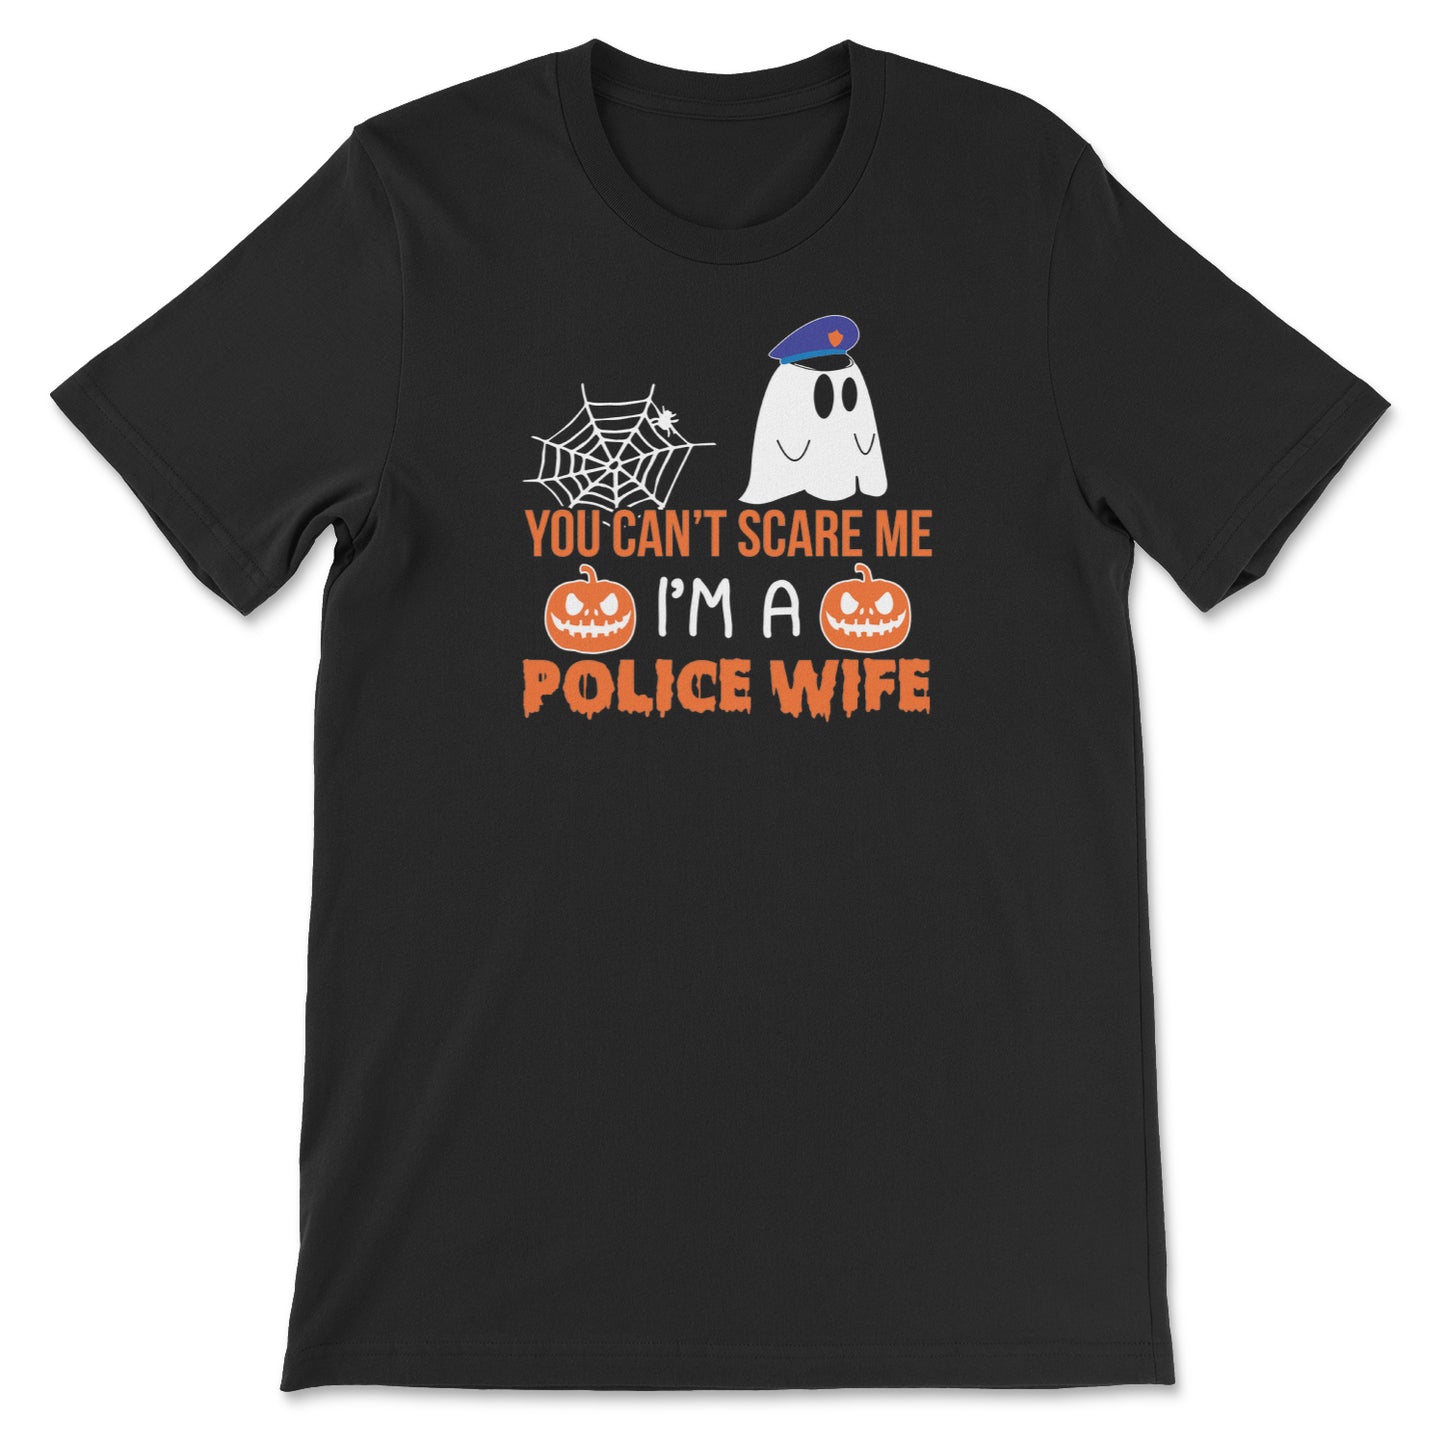 You Can't Scare Me I'm A Police Wife